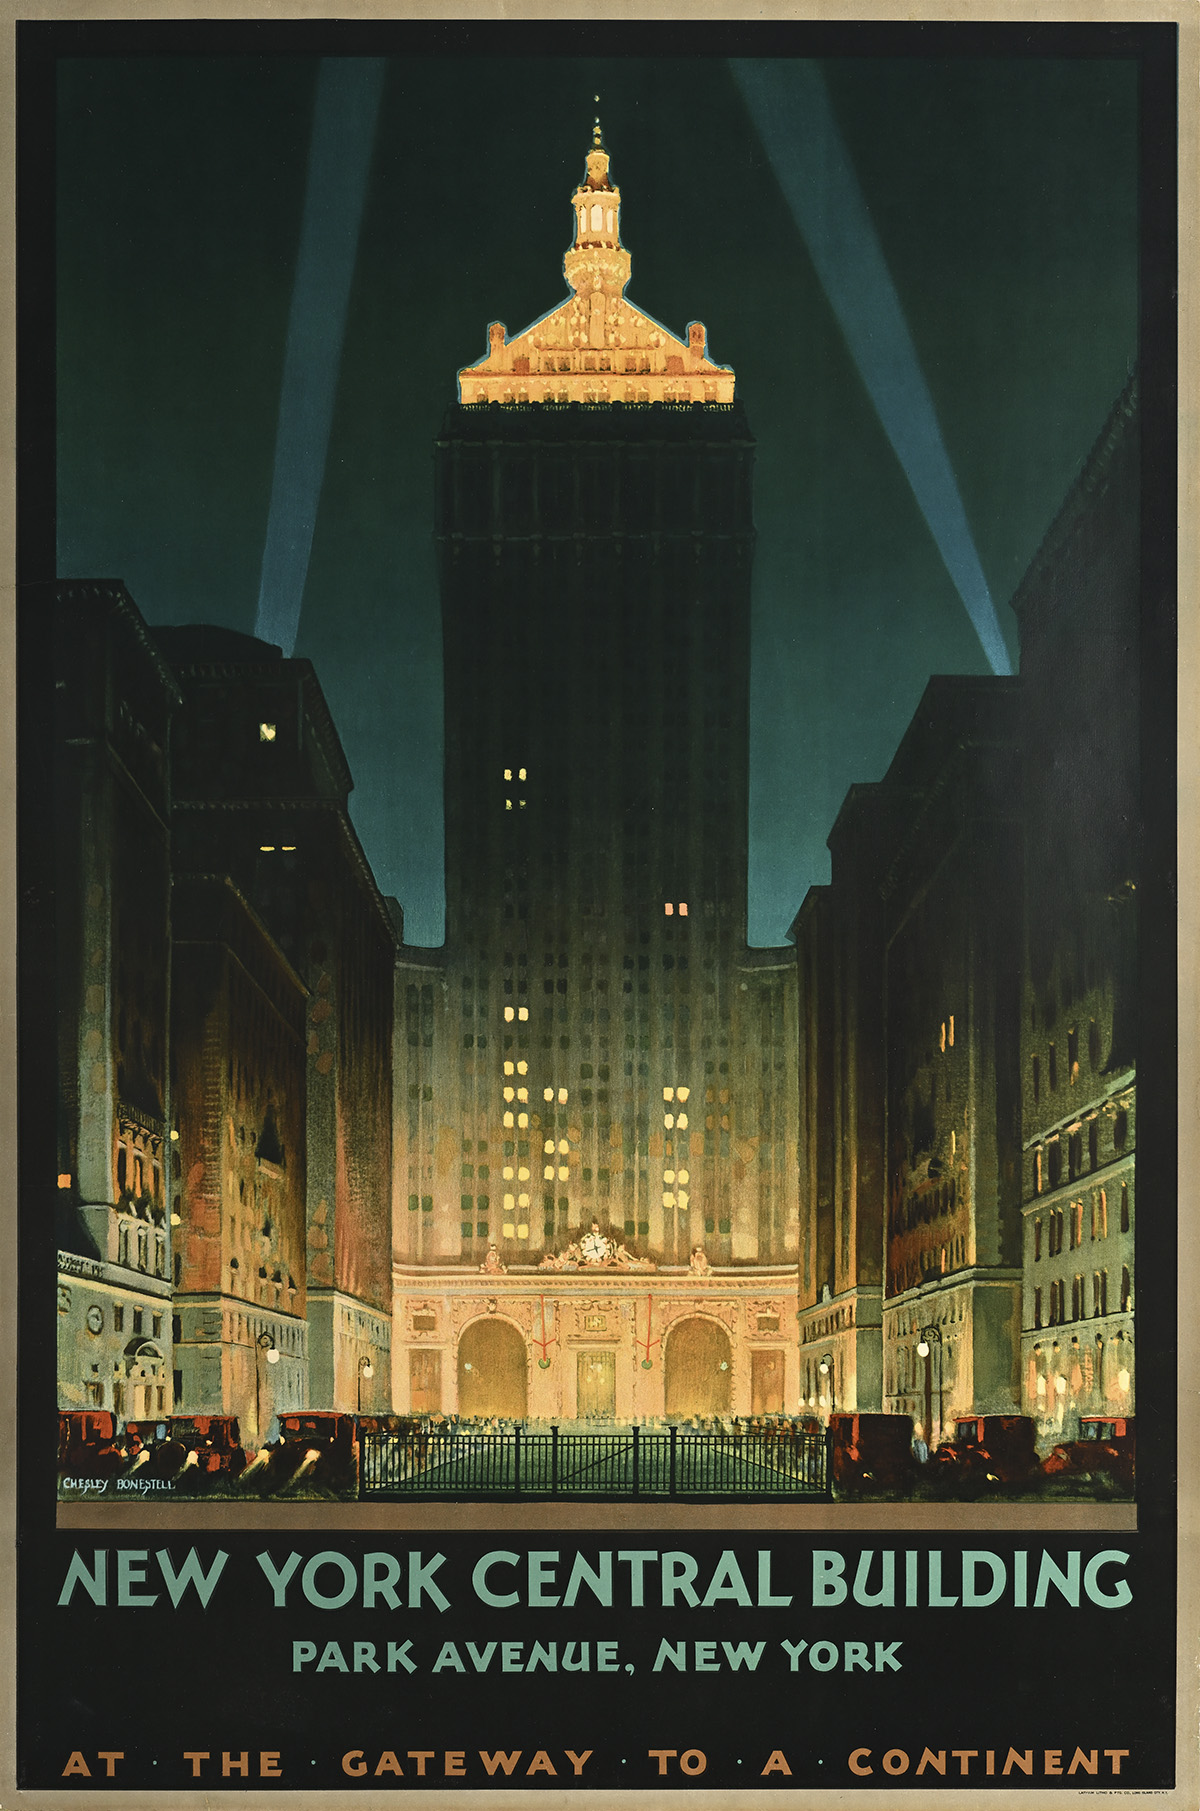 A poster of a tall building with a pointed roof illuminated at night with 2 spotlights behind it.